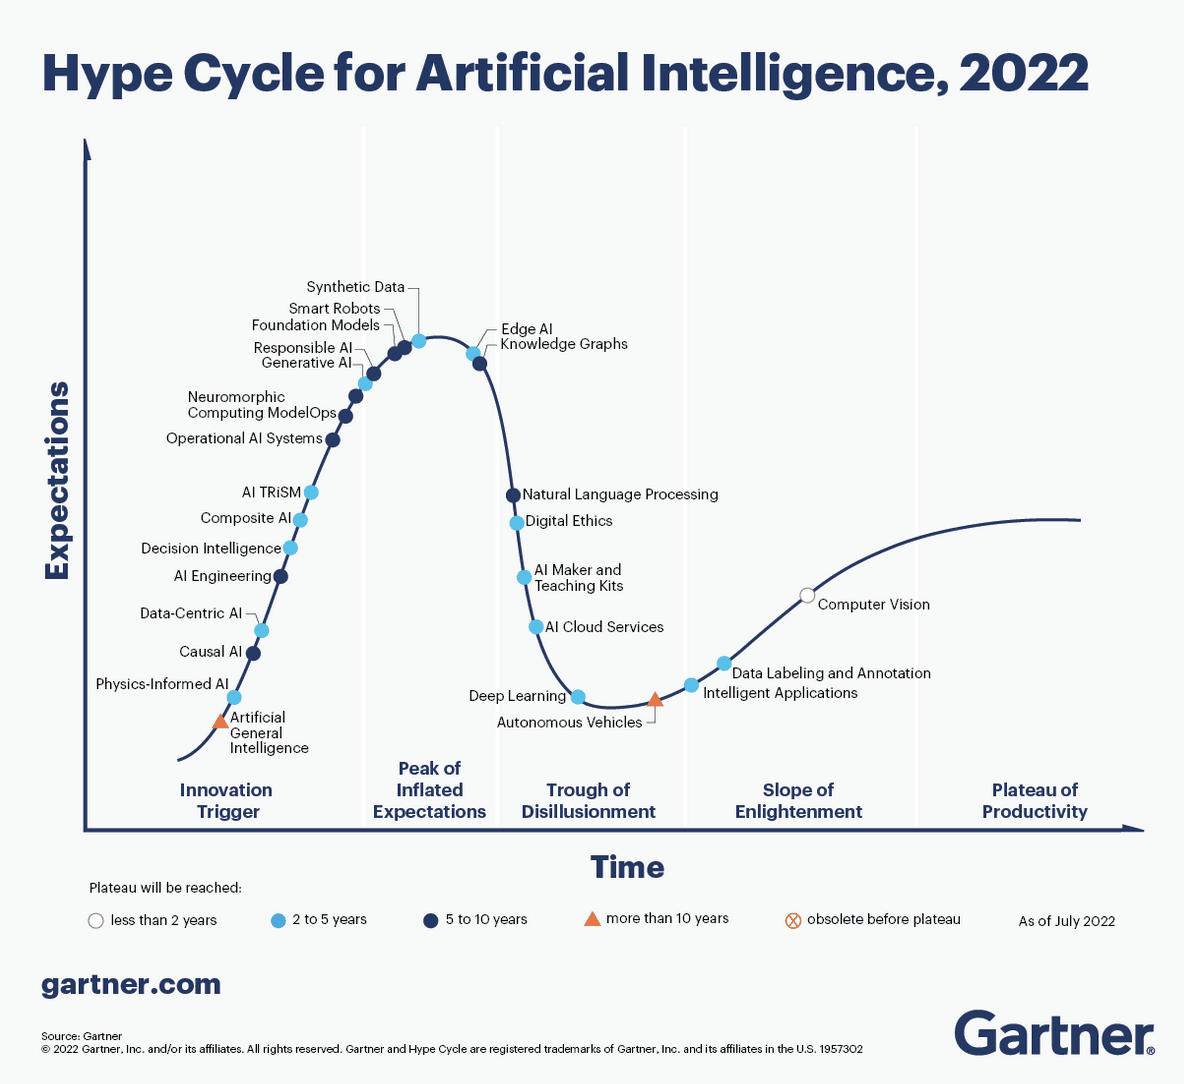 Image source: Gartner. Hype Cycle for Artificial Intelligence 2022